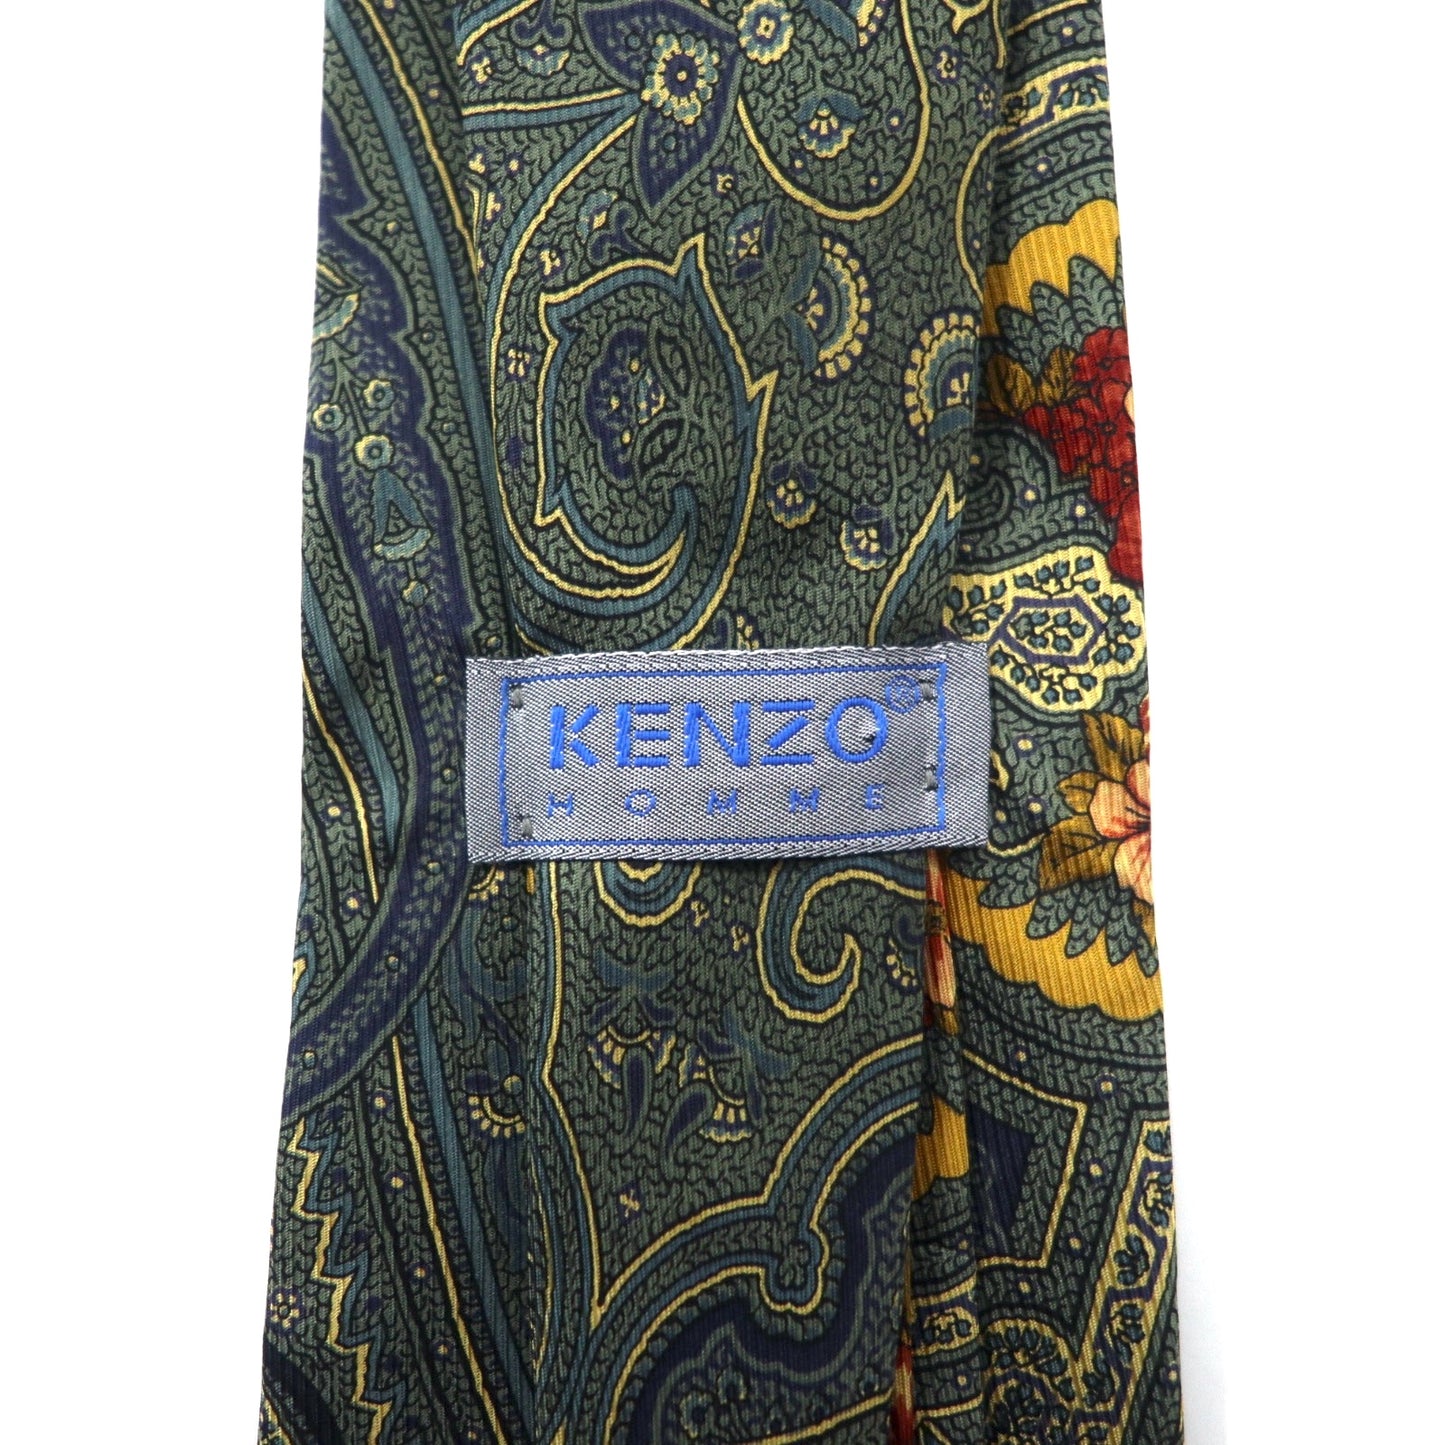 KENZO HOMME イタリア製 ネクタイ グリーン シルク 総柄 花柄